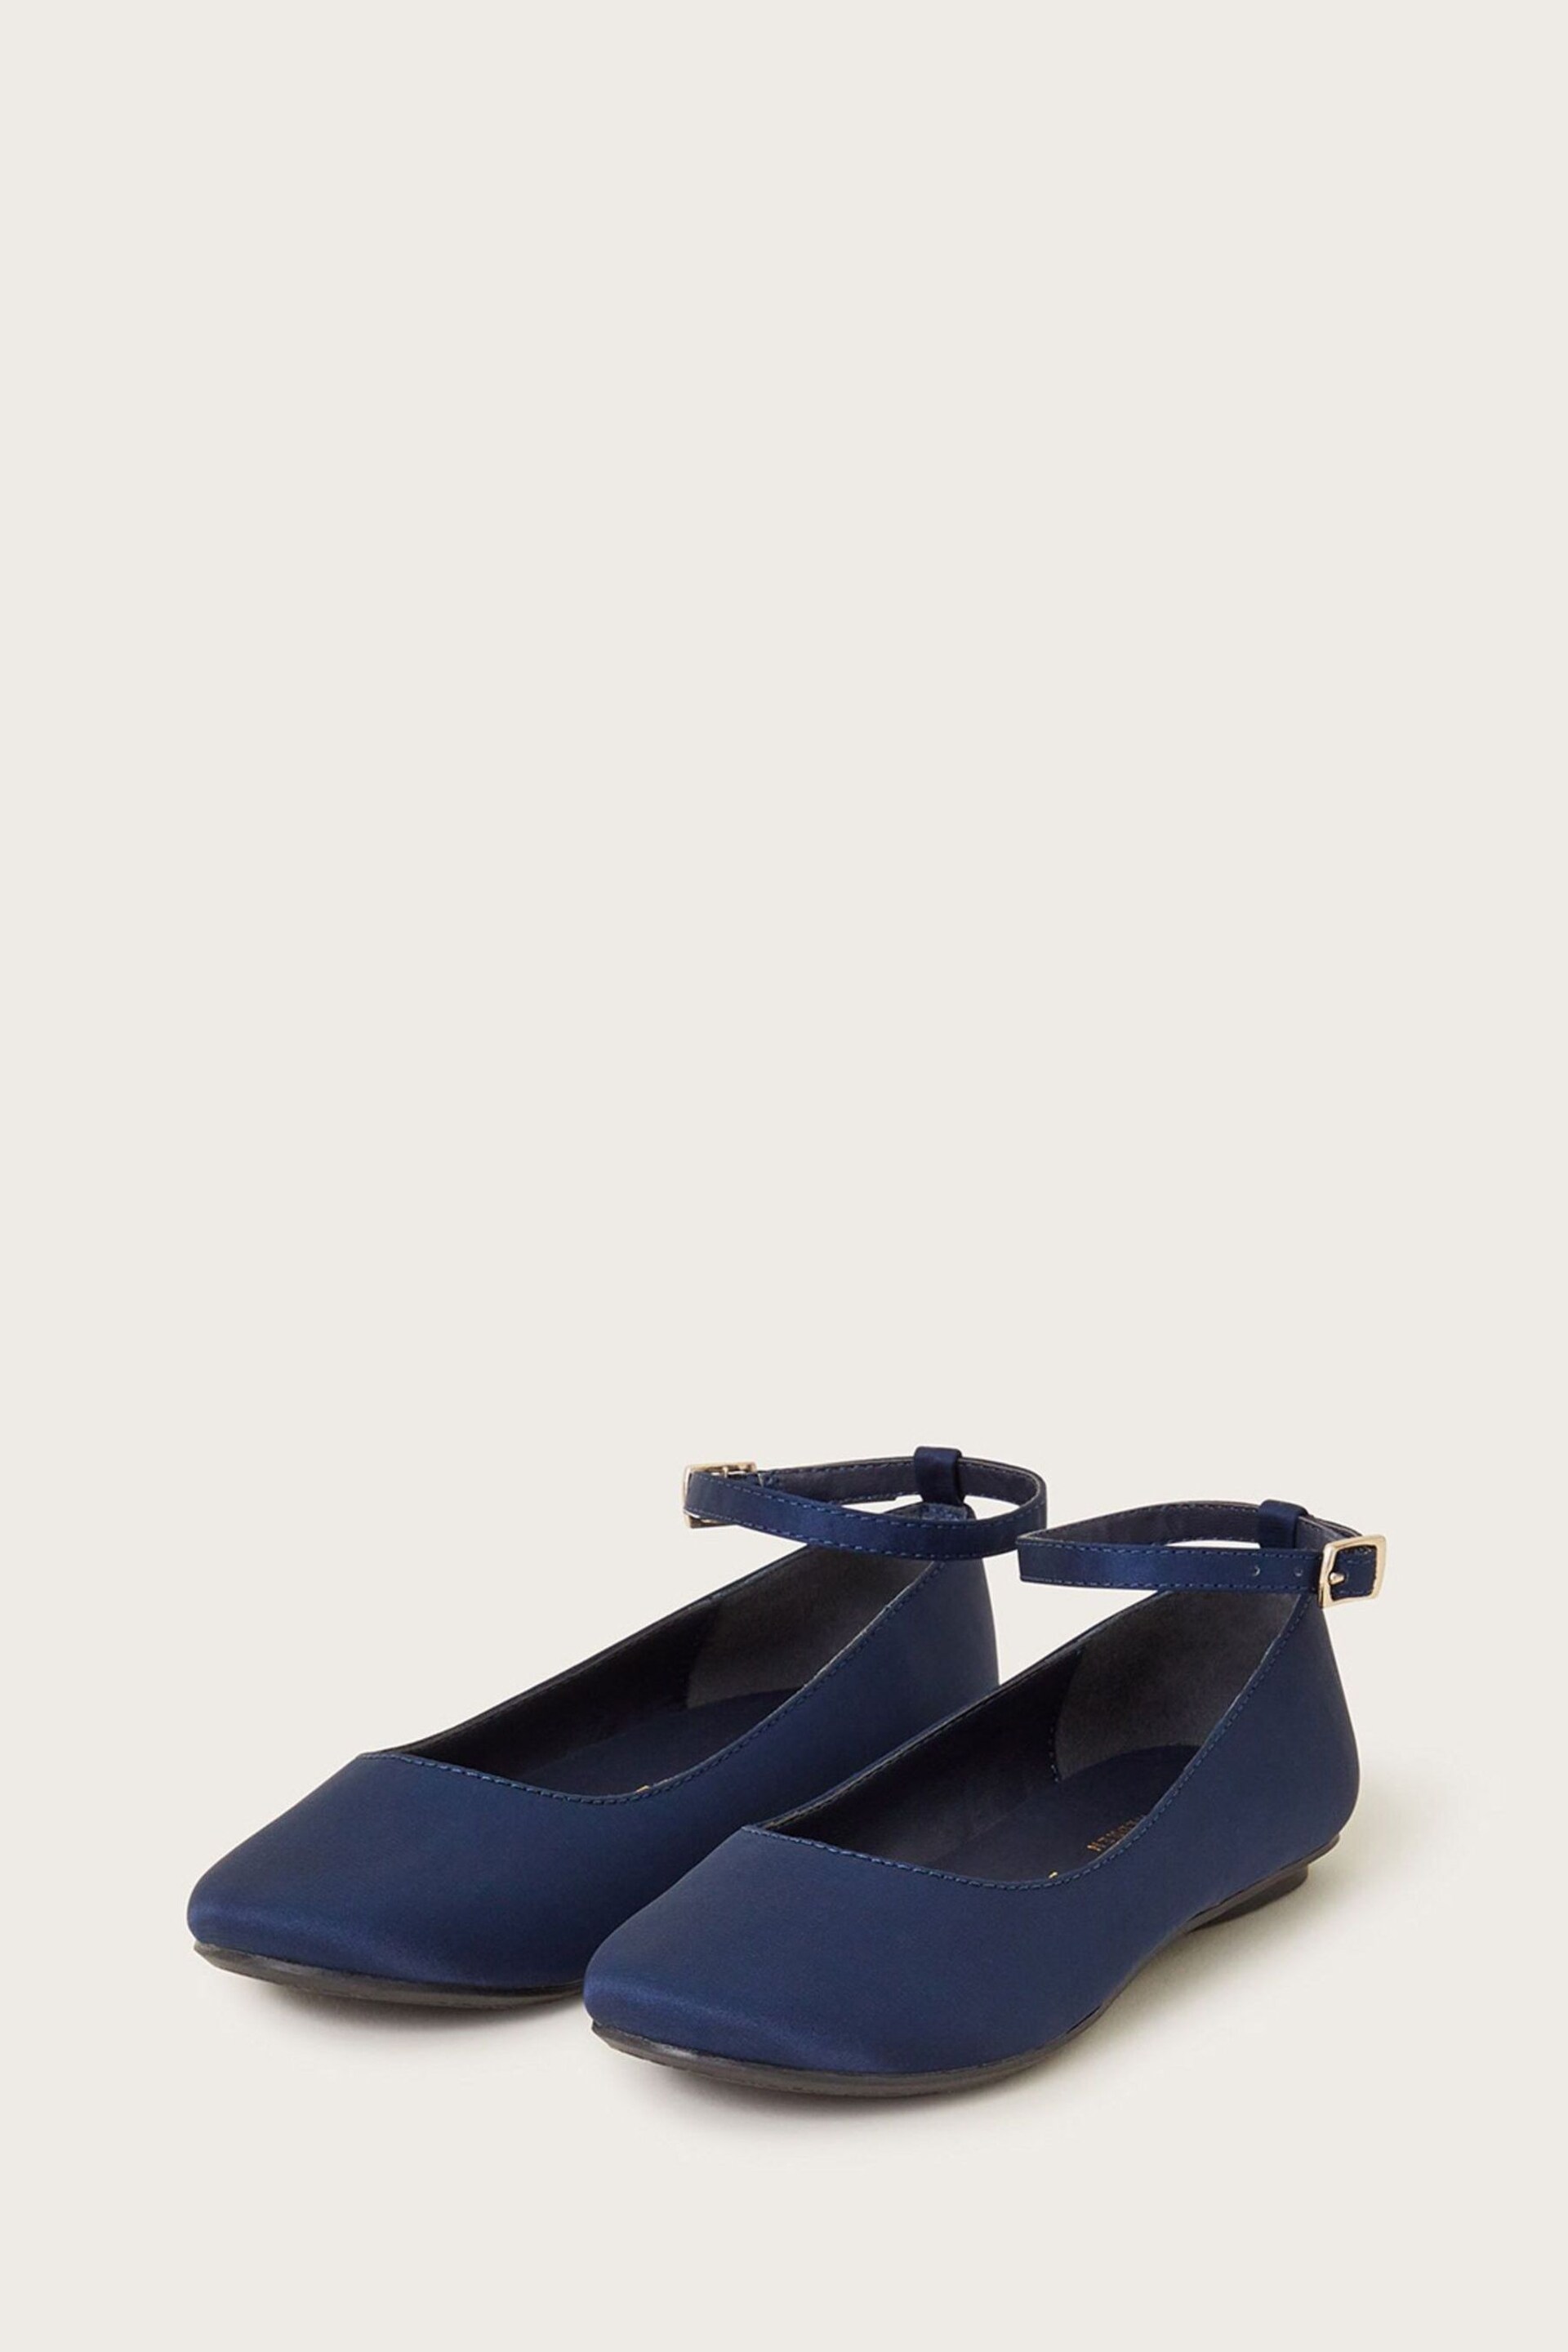 Monsoon Blue Ankle Strap Ballet Shoes - Image 2 of 3